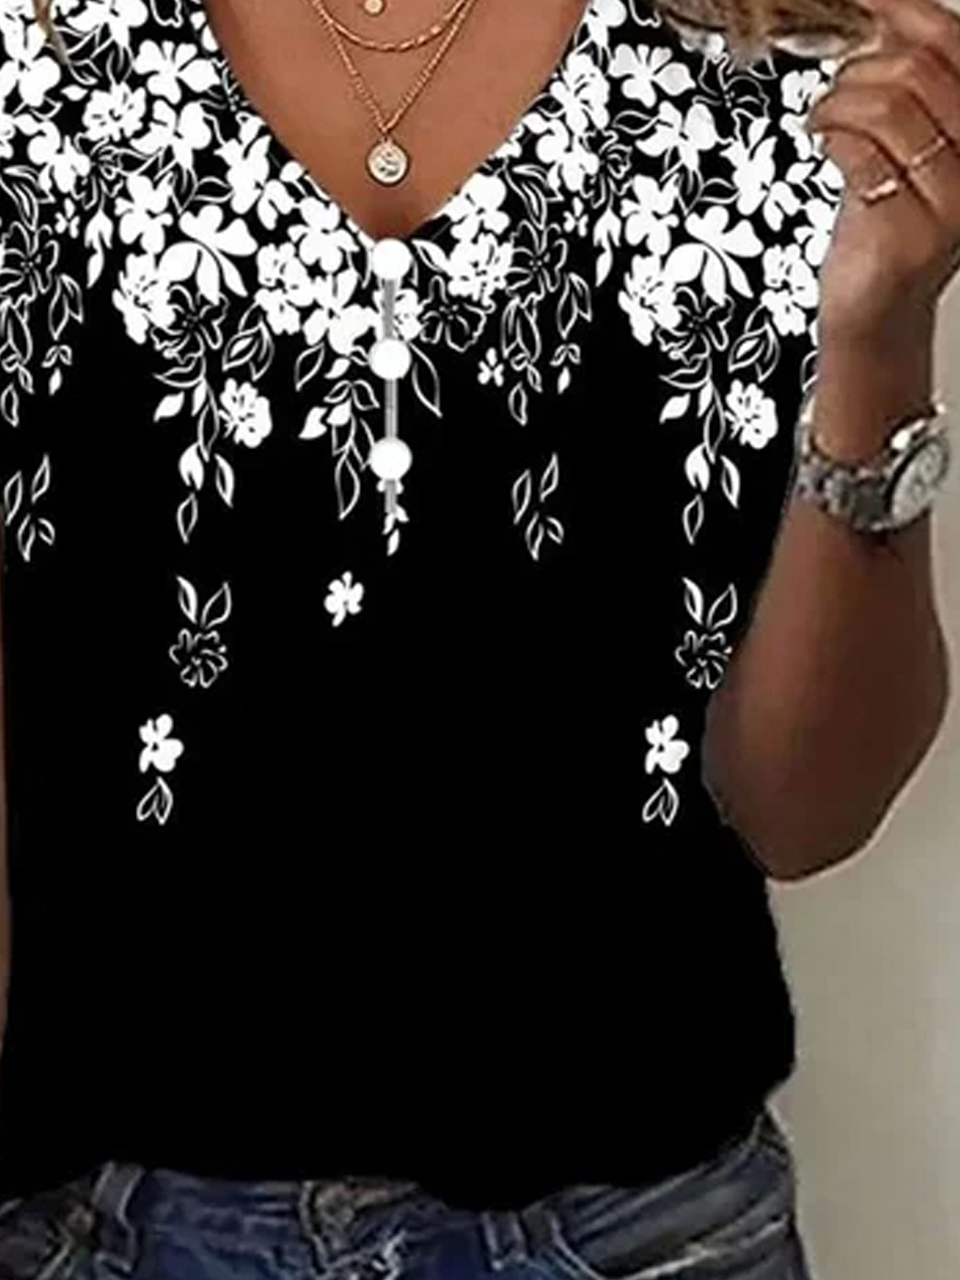 Plus size Casual Buckle Floral Loose T-Shirt